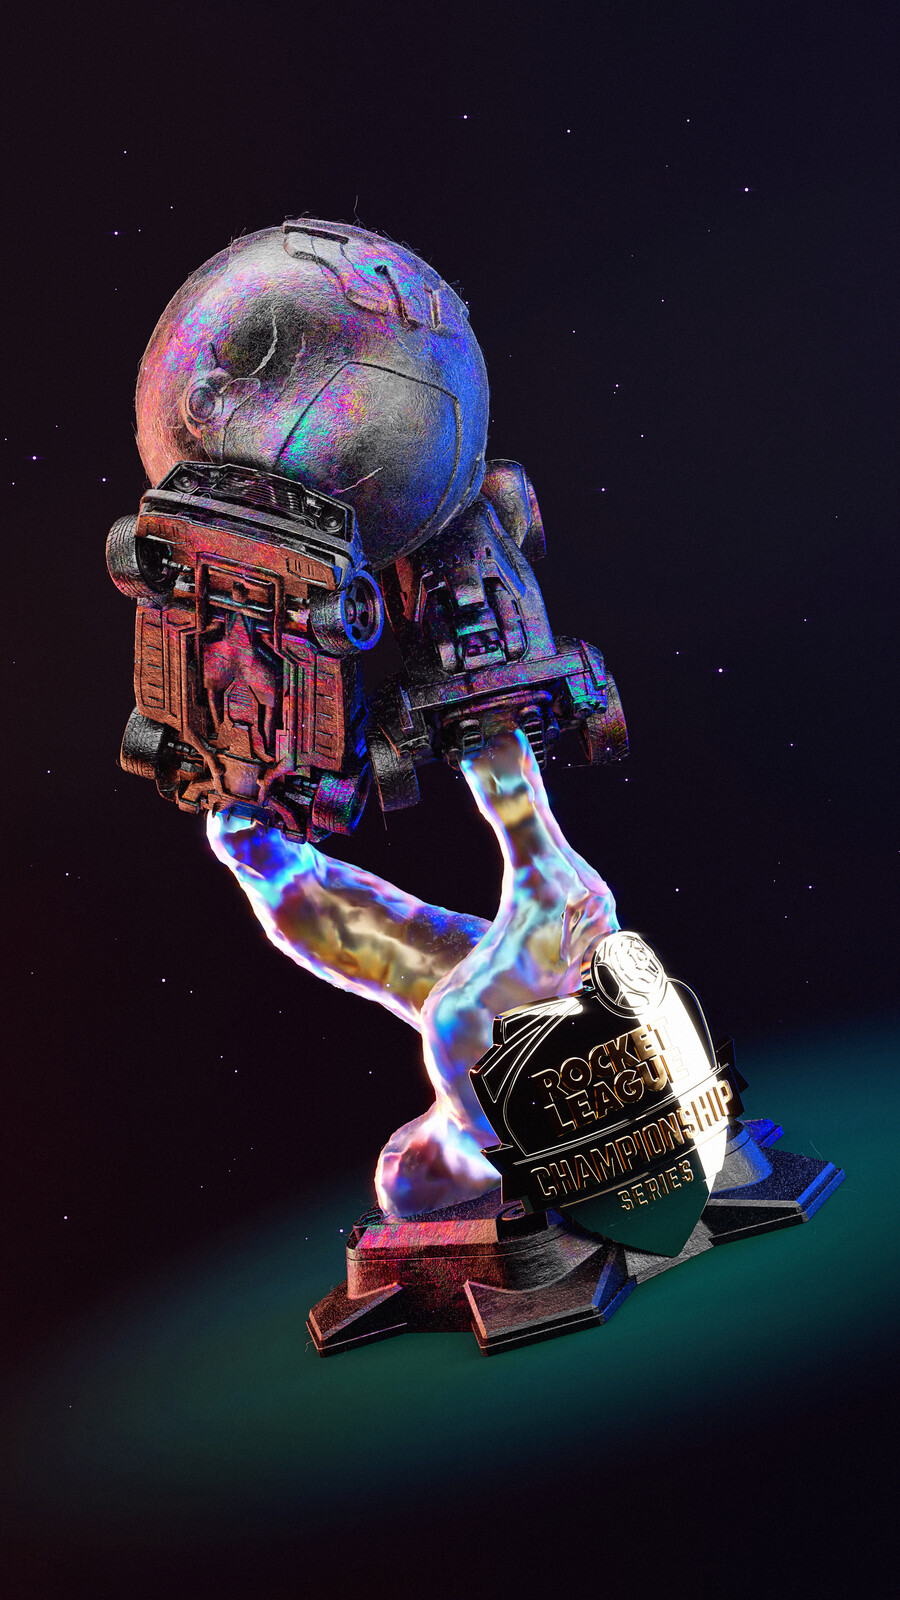 Rocket League Trophy Redesign: Homage to @VolpinProps